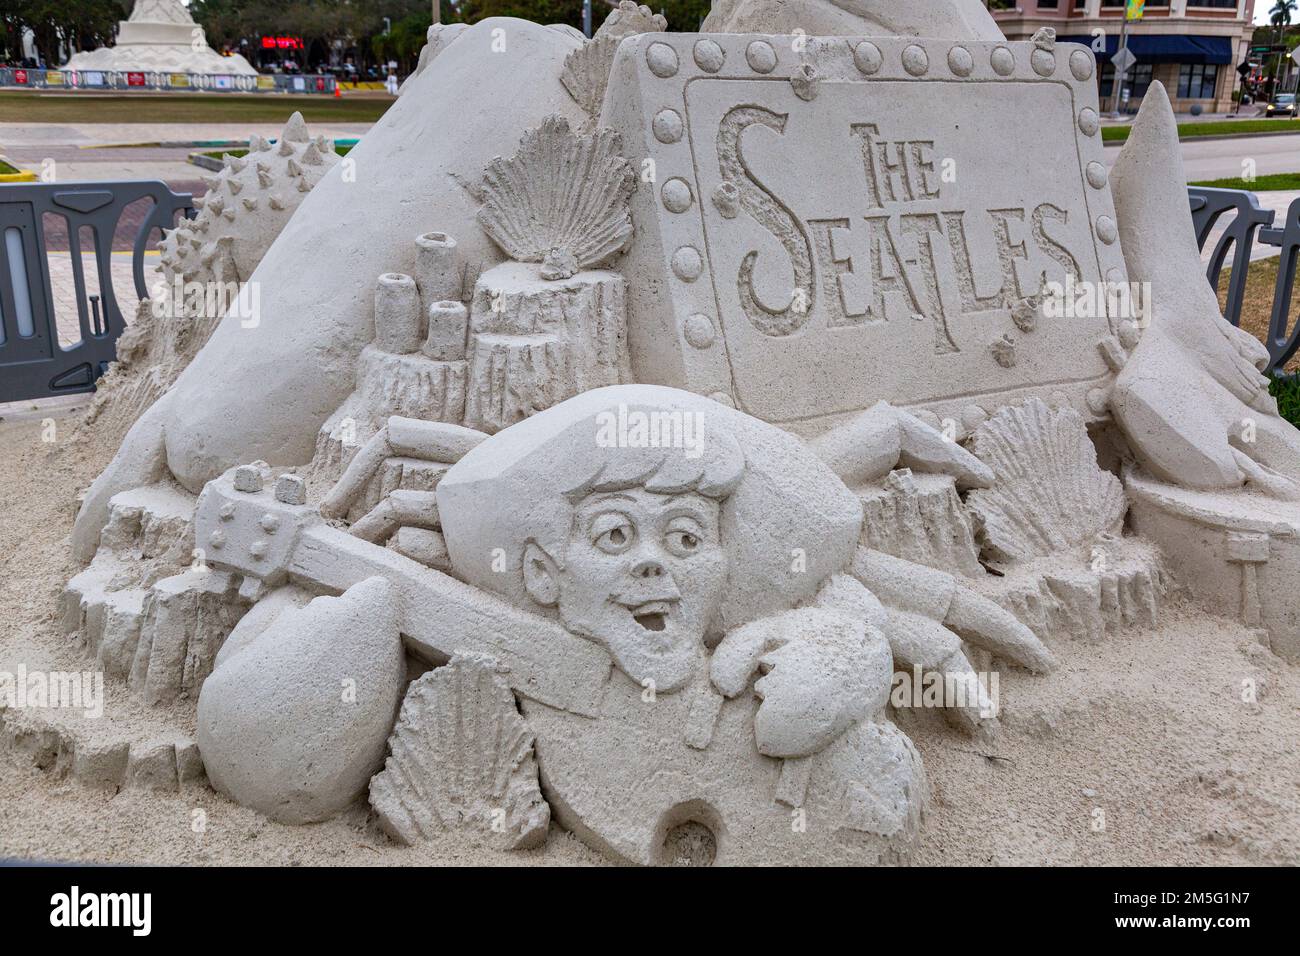 The sand sculpture 'Seatles' by Mark Mason and Team Sandtastic depicts Paul McCartney as a crab playing a guitar in West Palm Beach, Florida, USA. Stock Photo